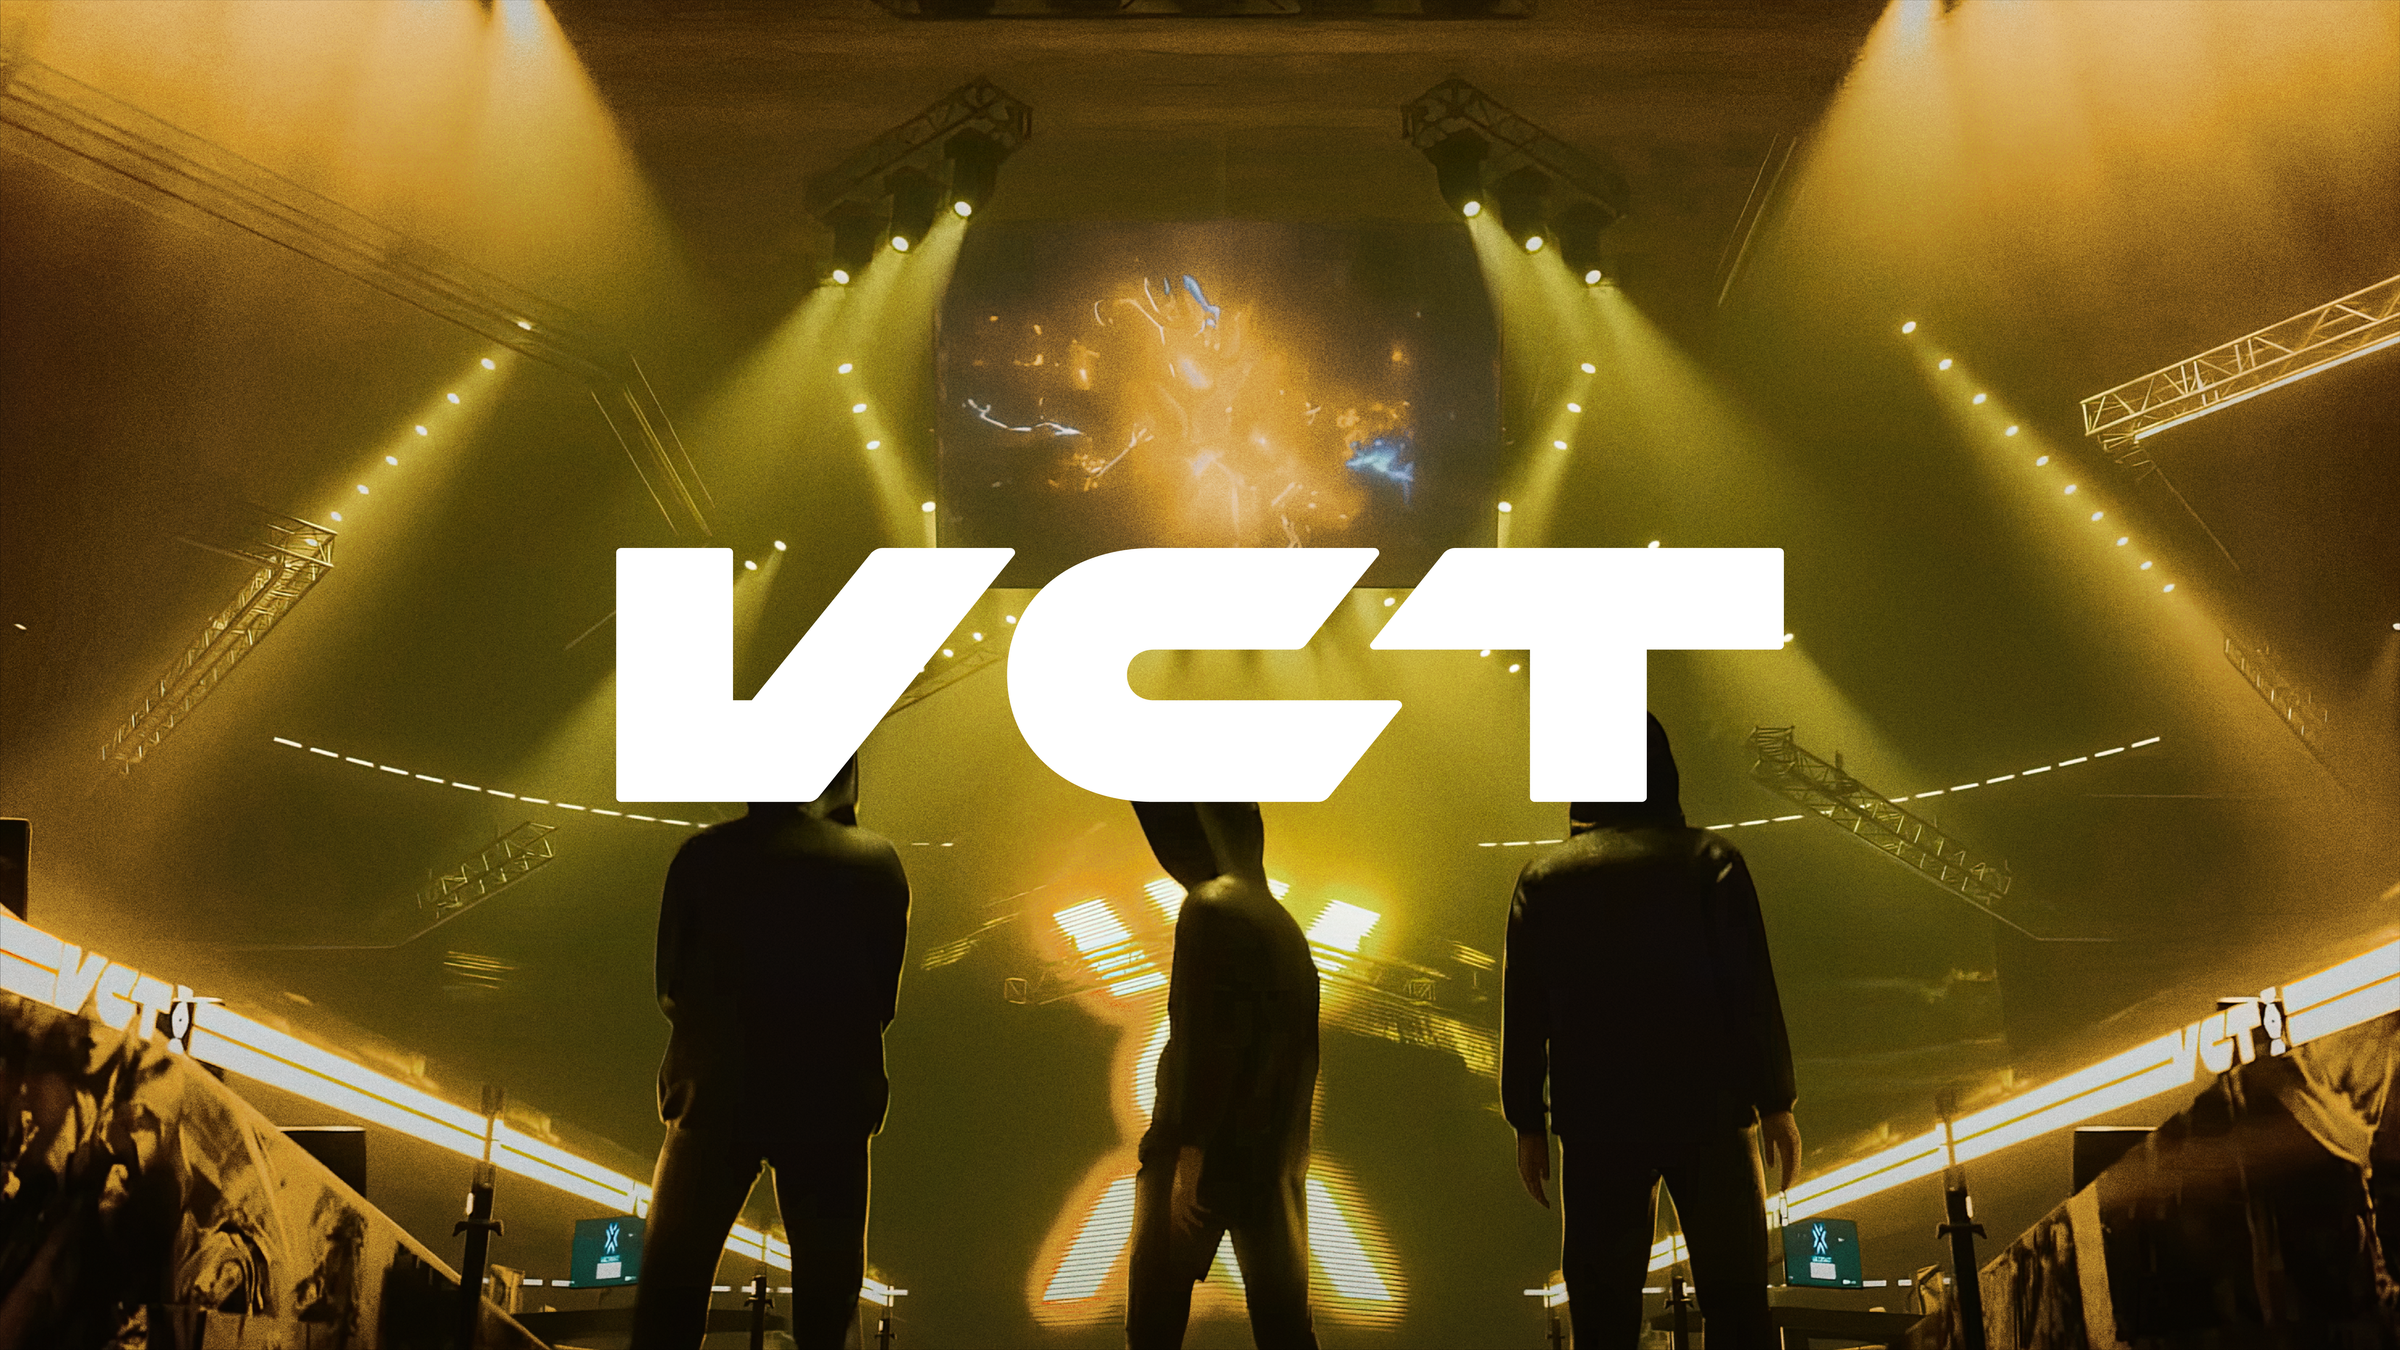 VALORANT: Top 5 Storylines for VCT Champions 2023 - Esports Illustrated